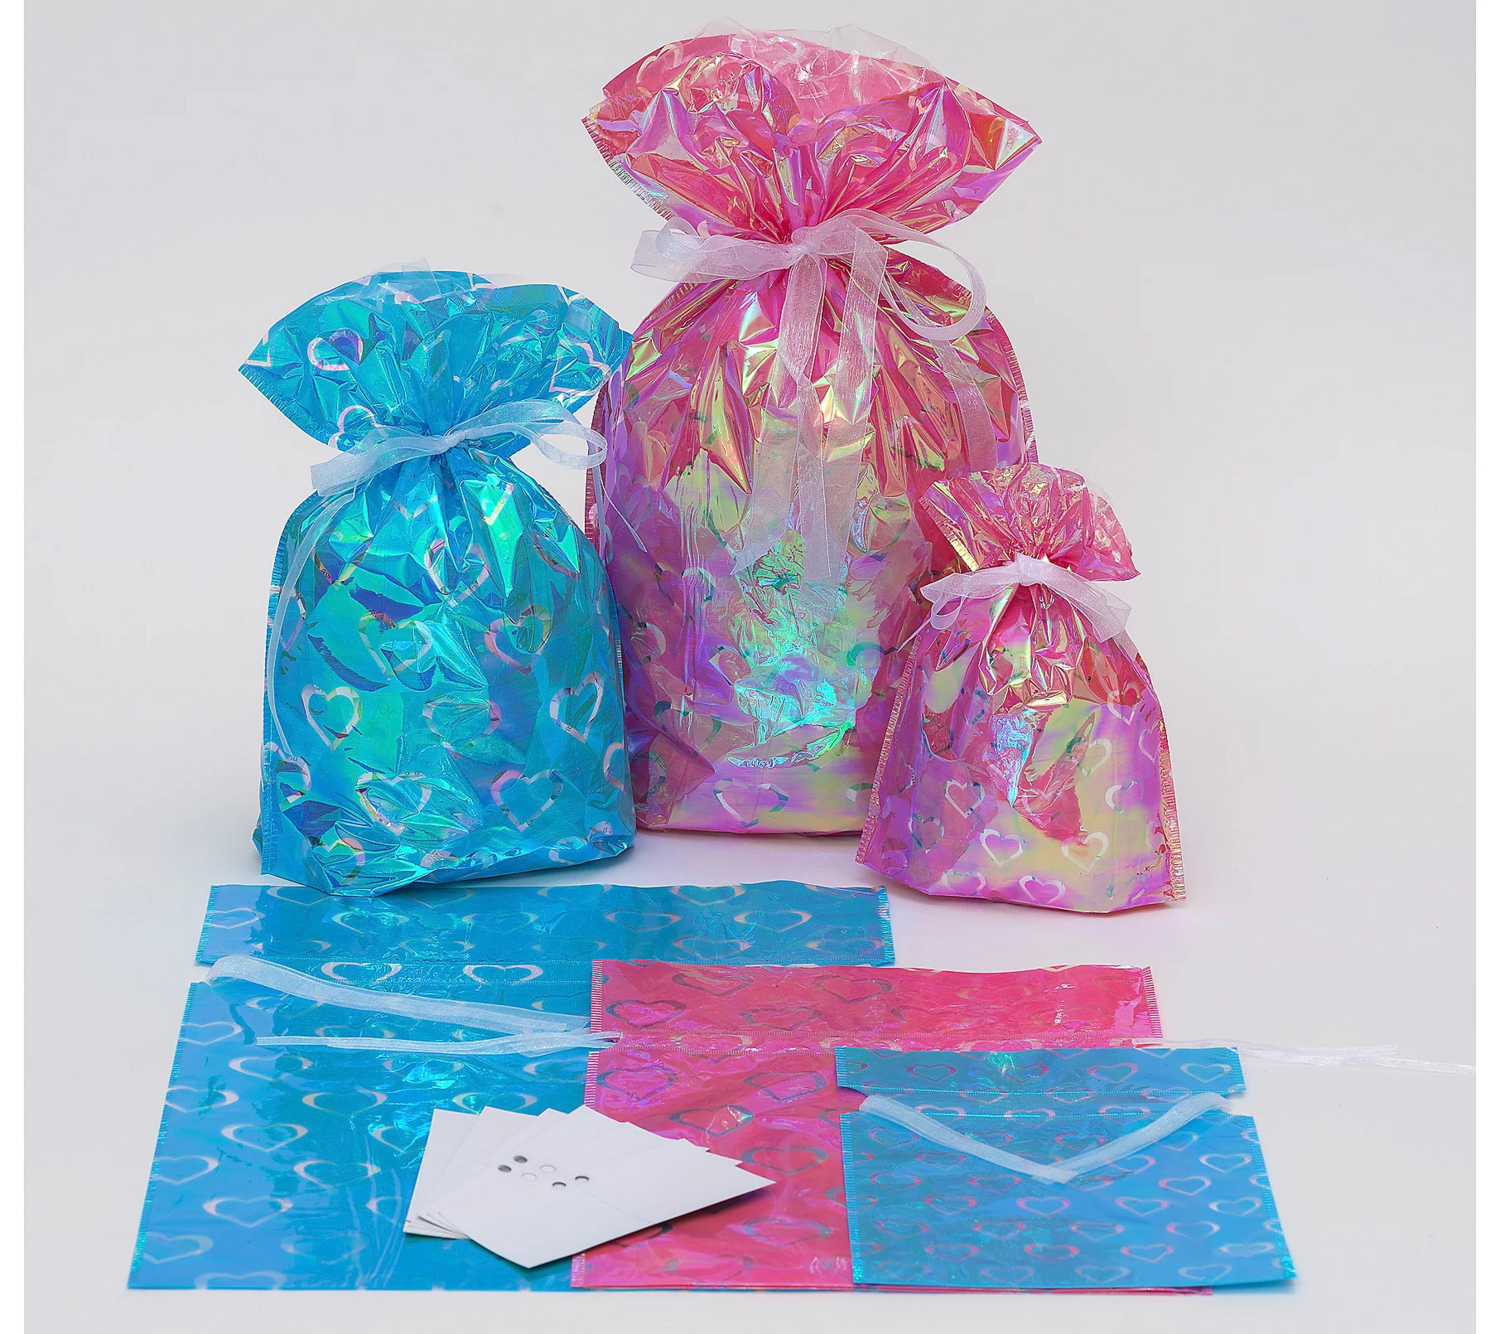 12-Piece Hearts Gift Bag Set (6 Gift Bags and 6 Gift Tags)